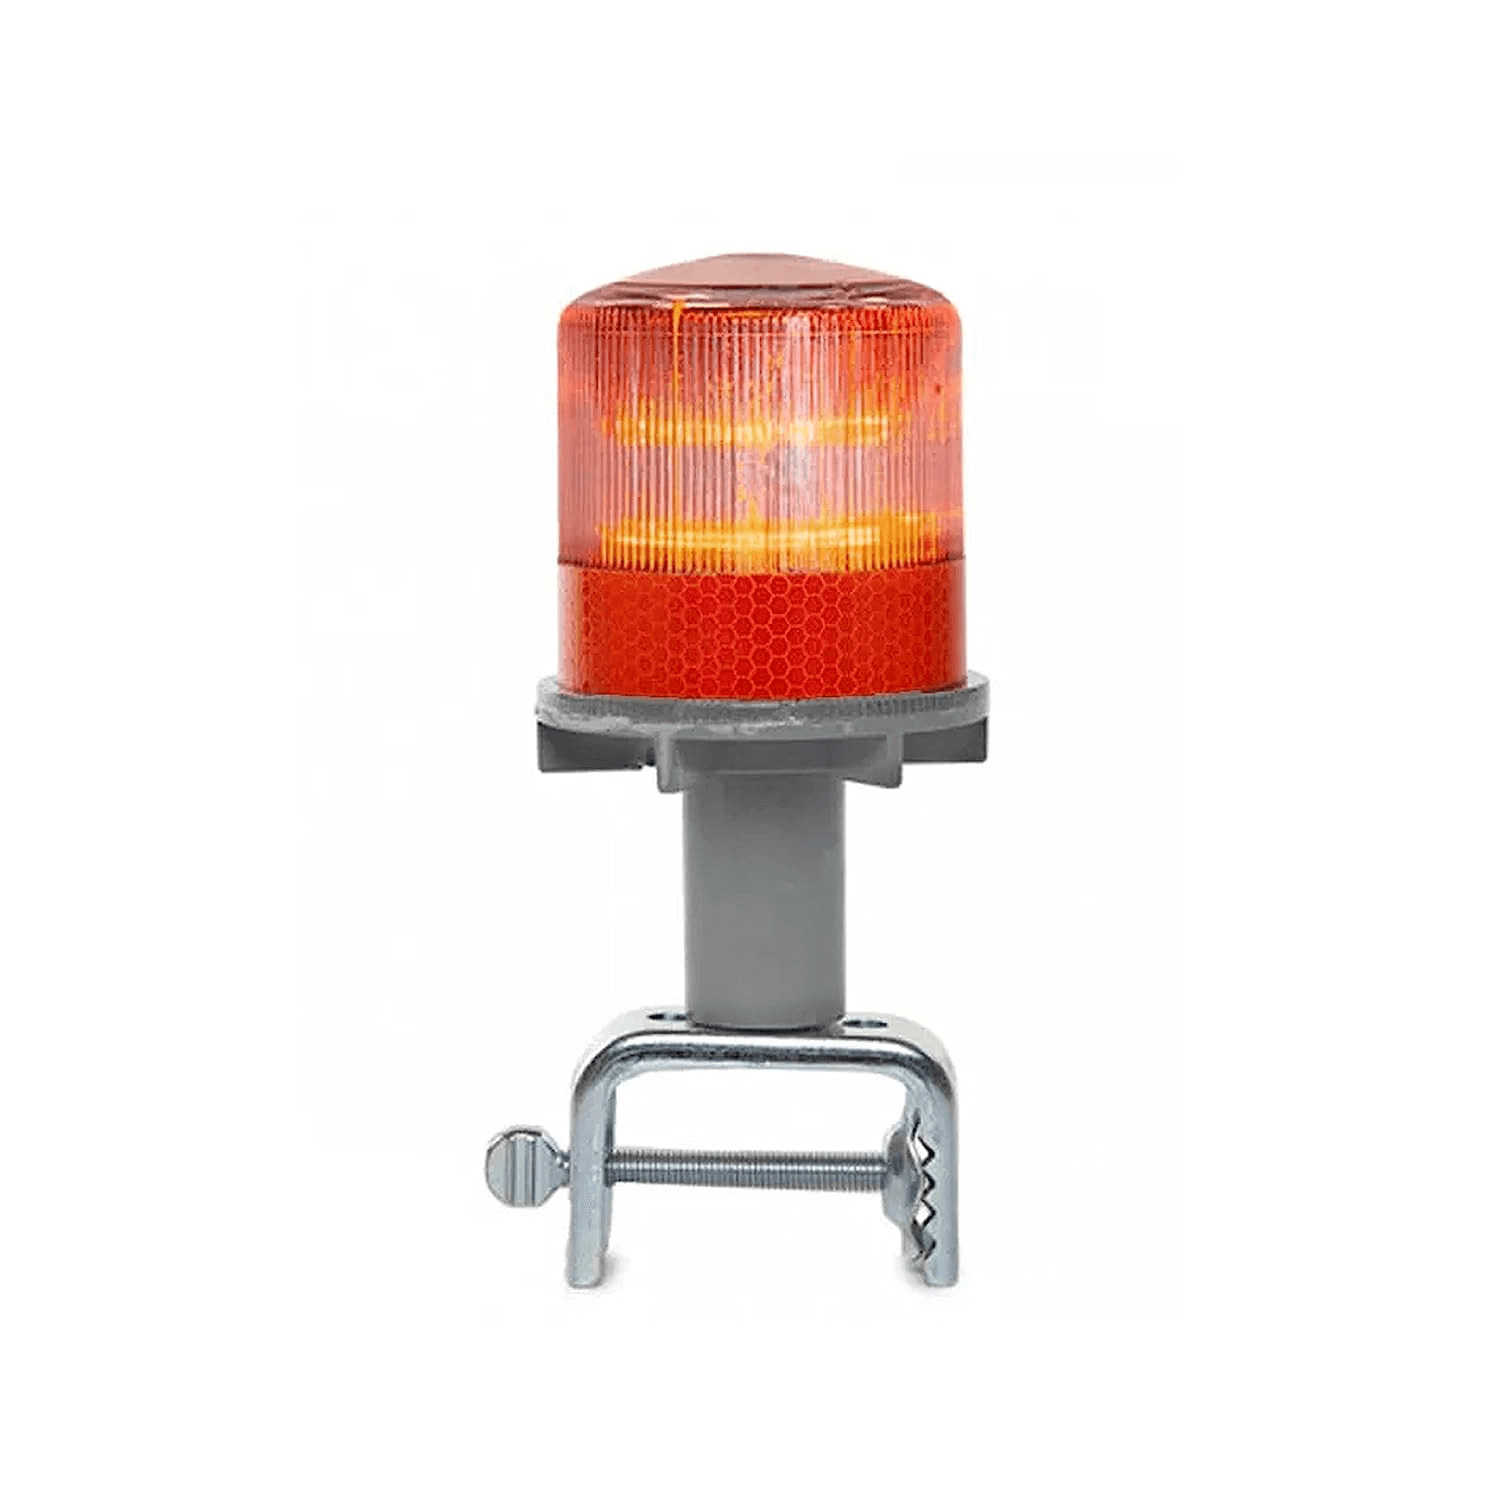 robustt-solar-blinker-light-of-aluminium-casting-and-abs-clamp-with-round-road-reflector-pack-of-1